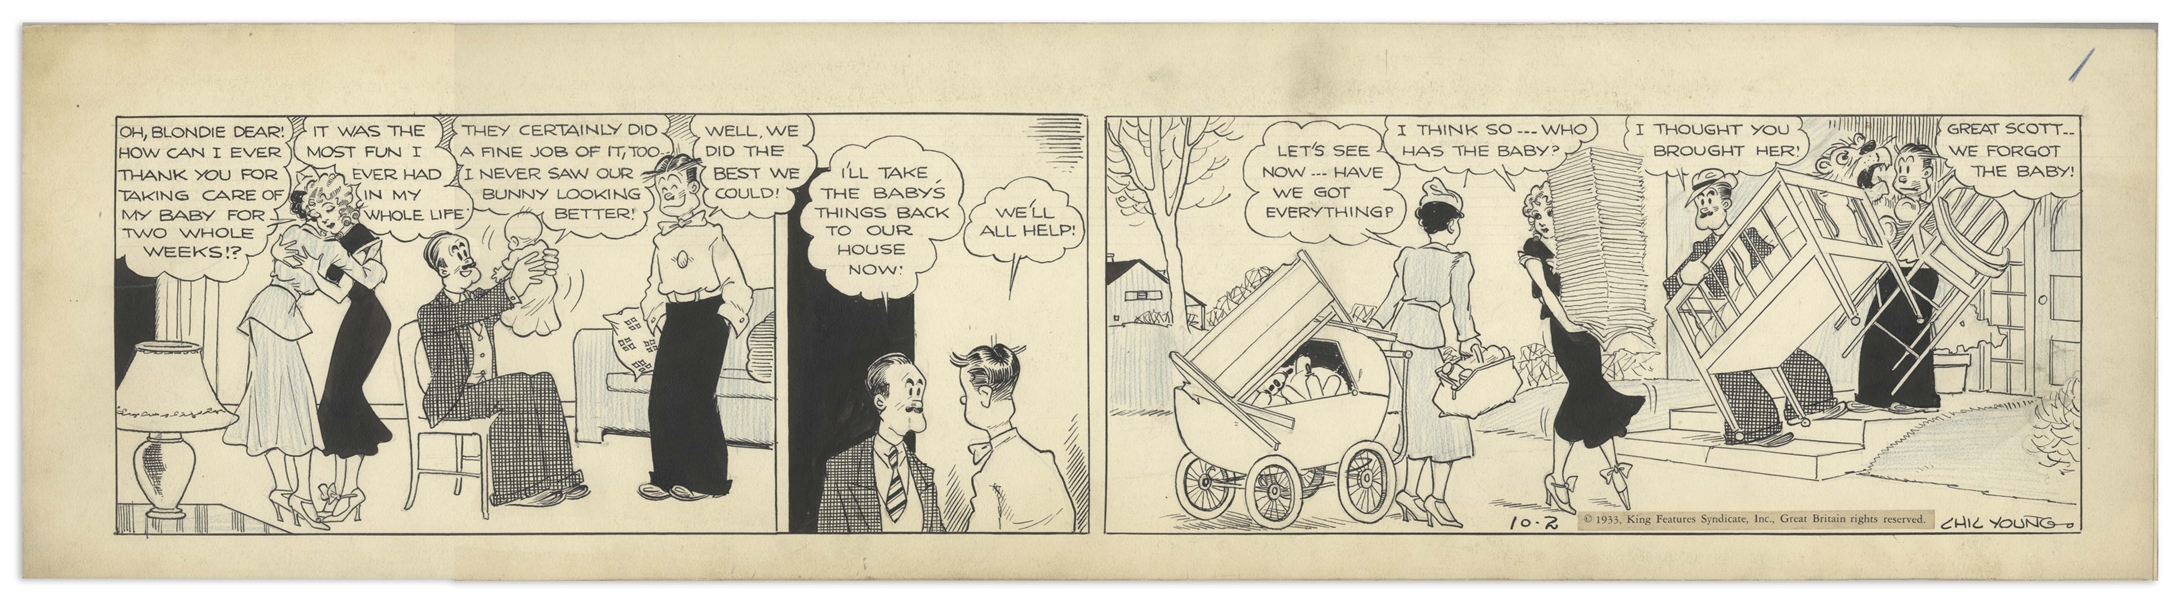 Chic Young Hand-Drawn ''Blondie'' Comic Strip From 1933 Titled ''Just a Minor Detail'' -- The Woodley's Have a Baby